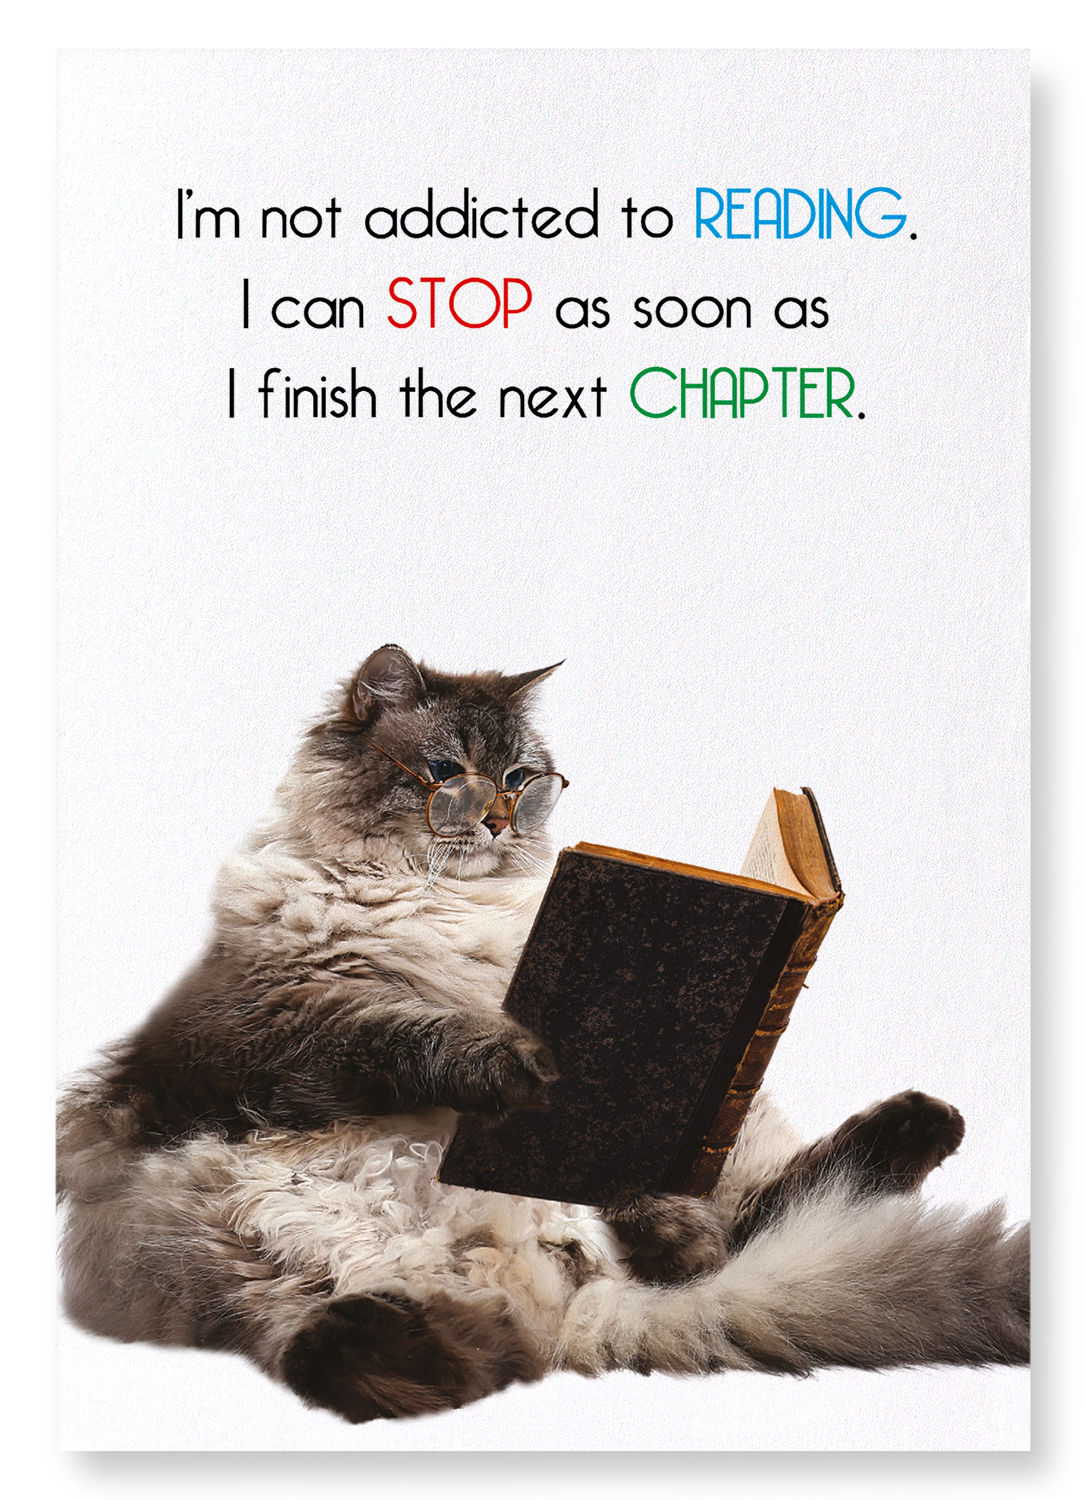 NOT ADDICTED TO READING: Funny Animal Art print